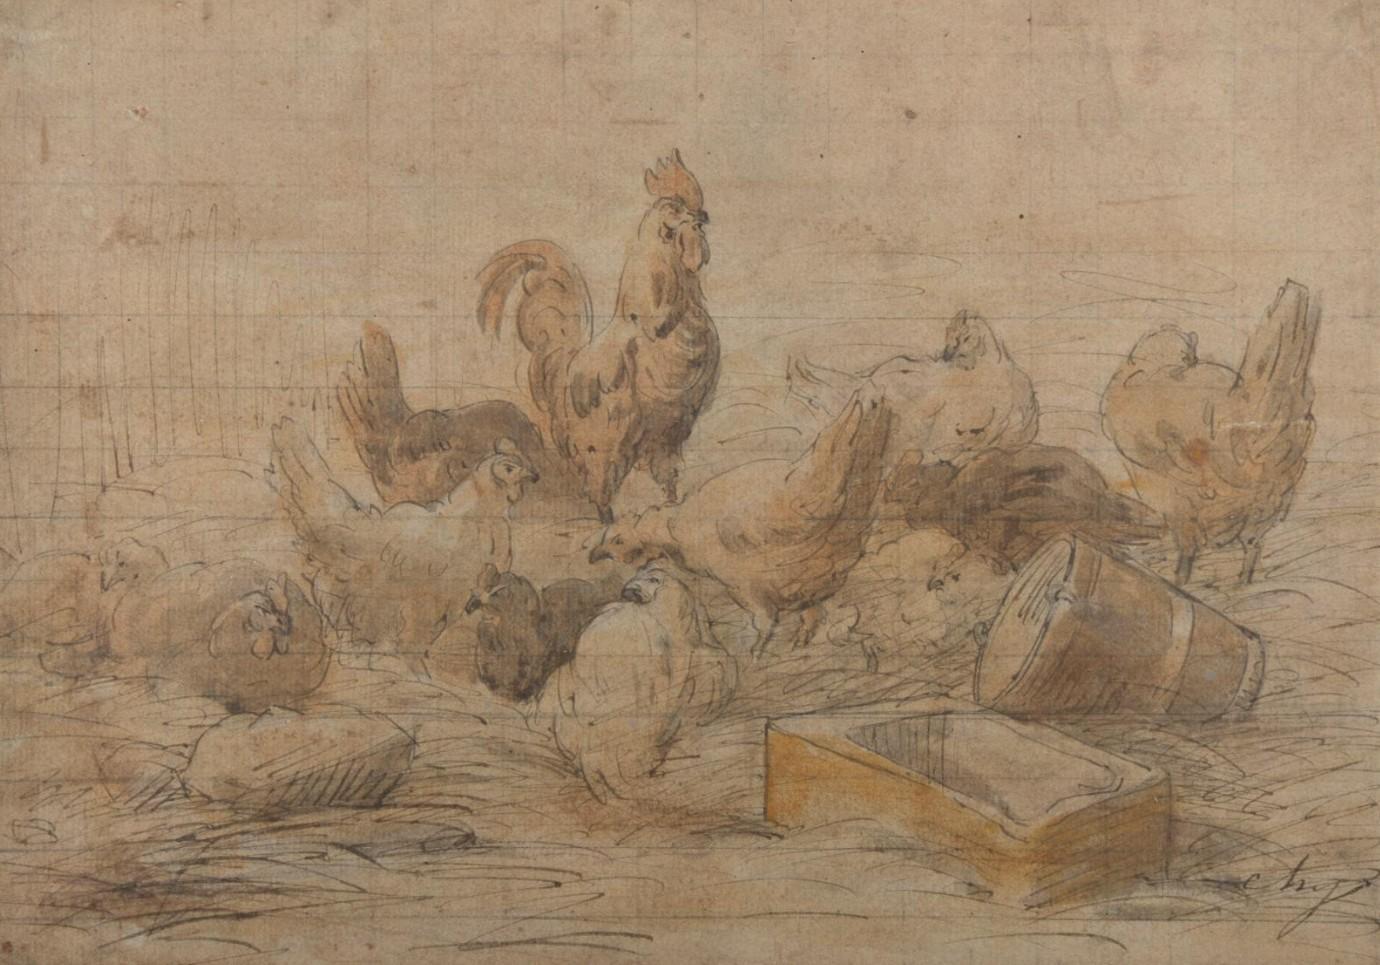 Charles Emile JACQUE (Paris 1813 - 1894) Hens and rooster, preparatory drawing - Art by Charles Jacque